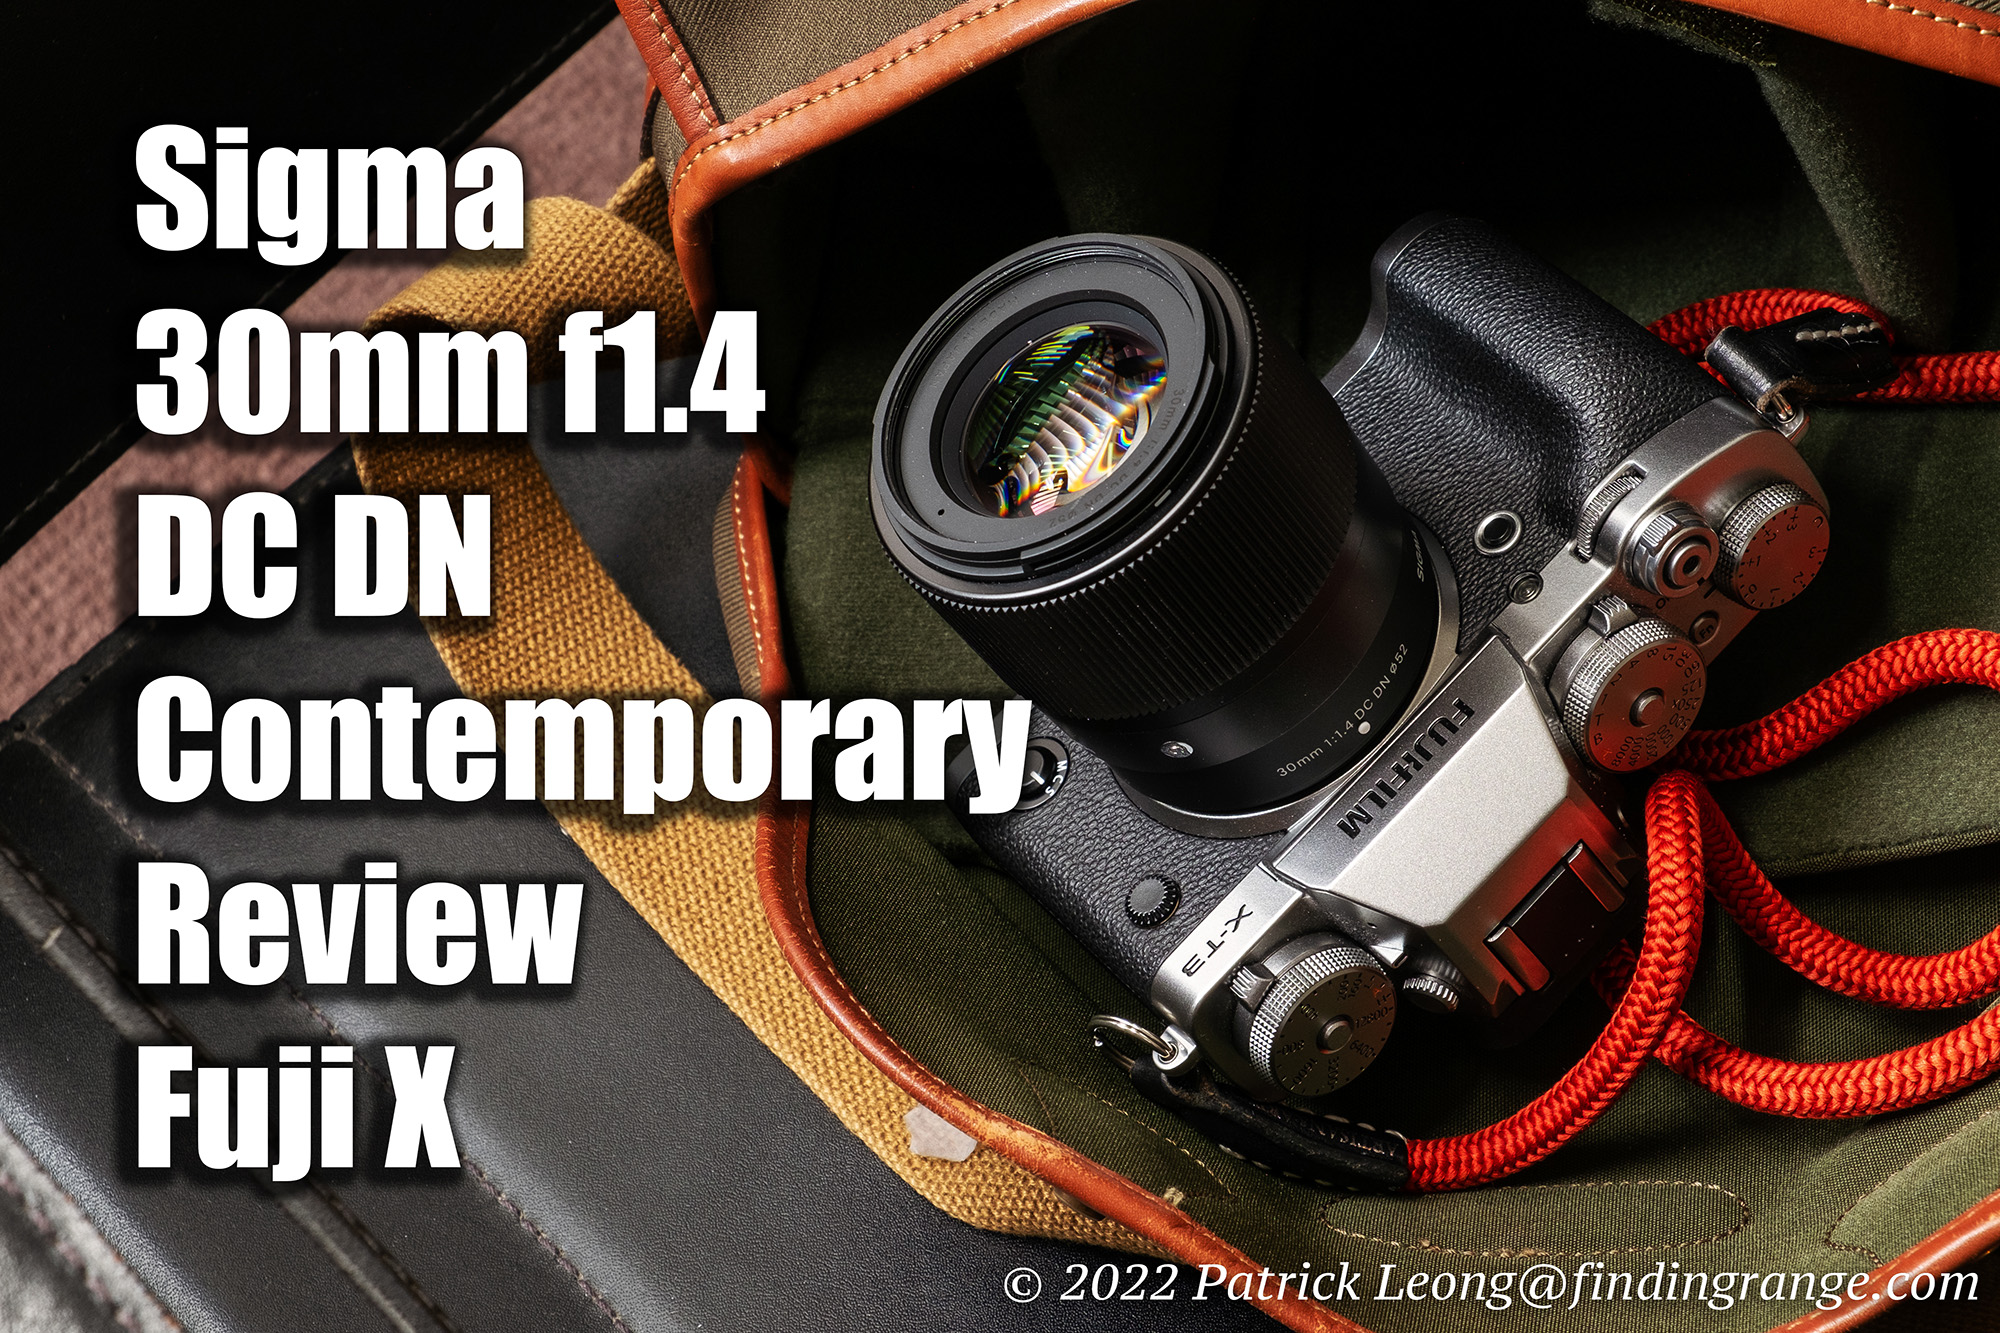 Sigma 30mm f1.4 DC DN Contemporary Review Fuji X - Finding Range